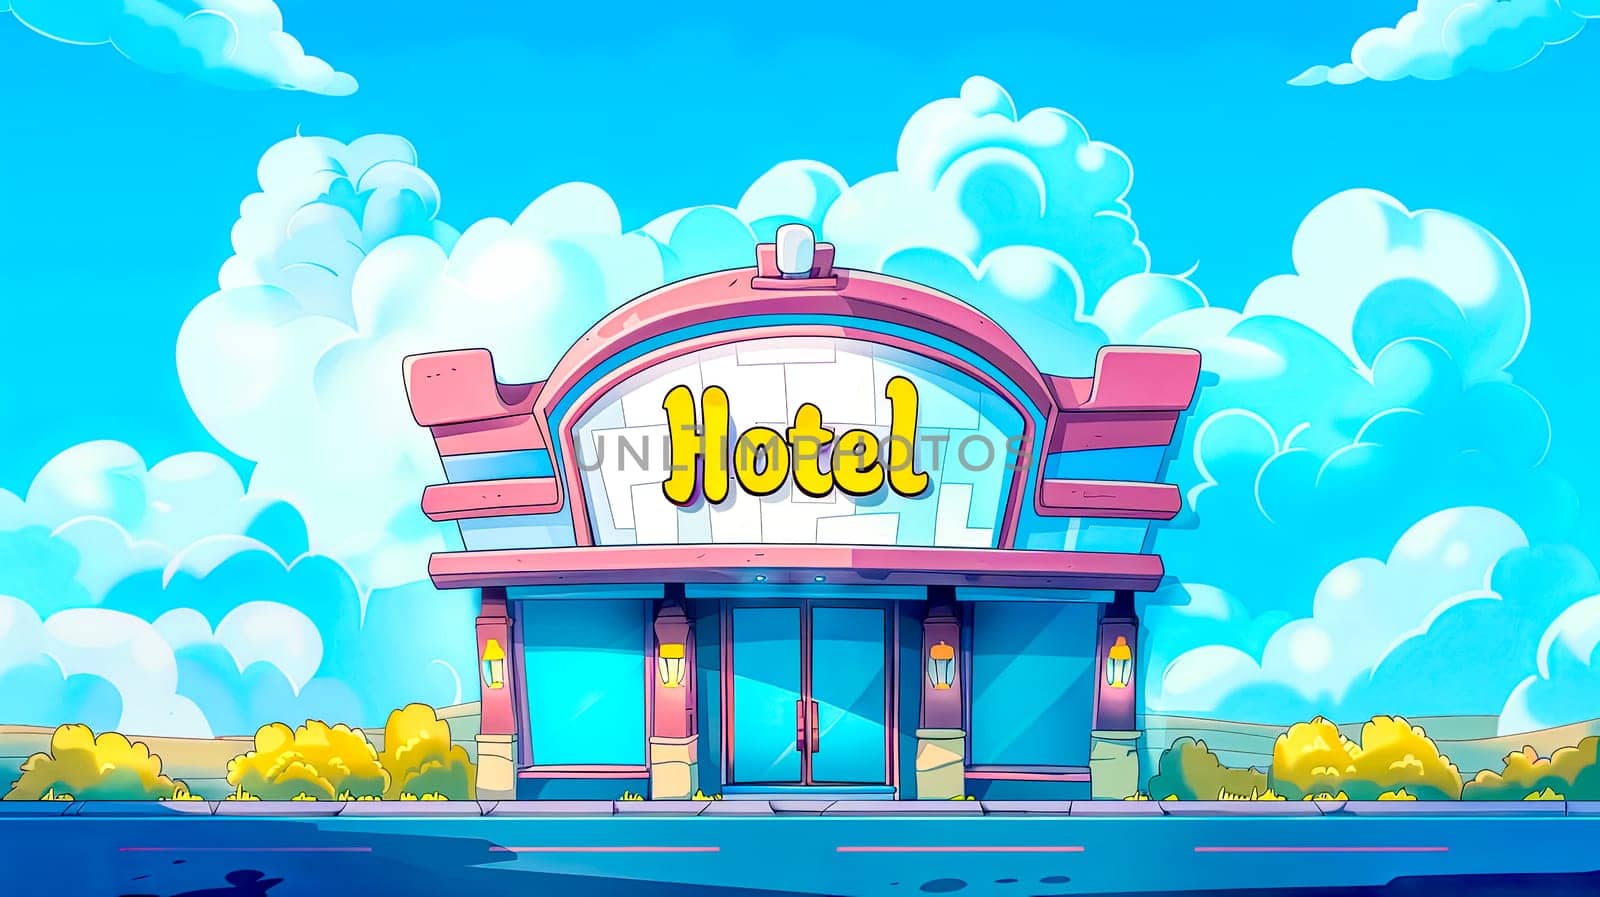 Vibrant animated hotel illustration with whimsical architecture and a clear sky